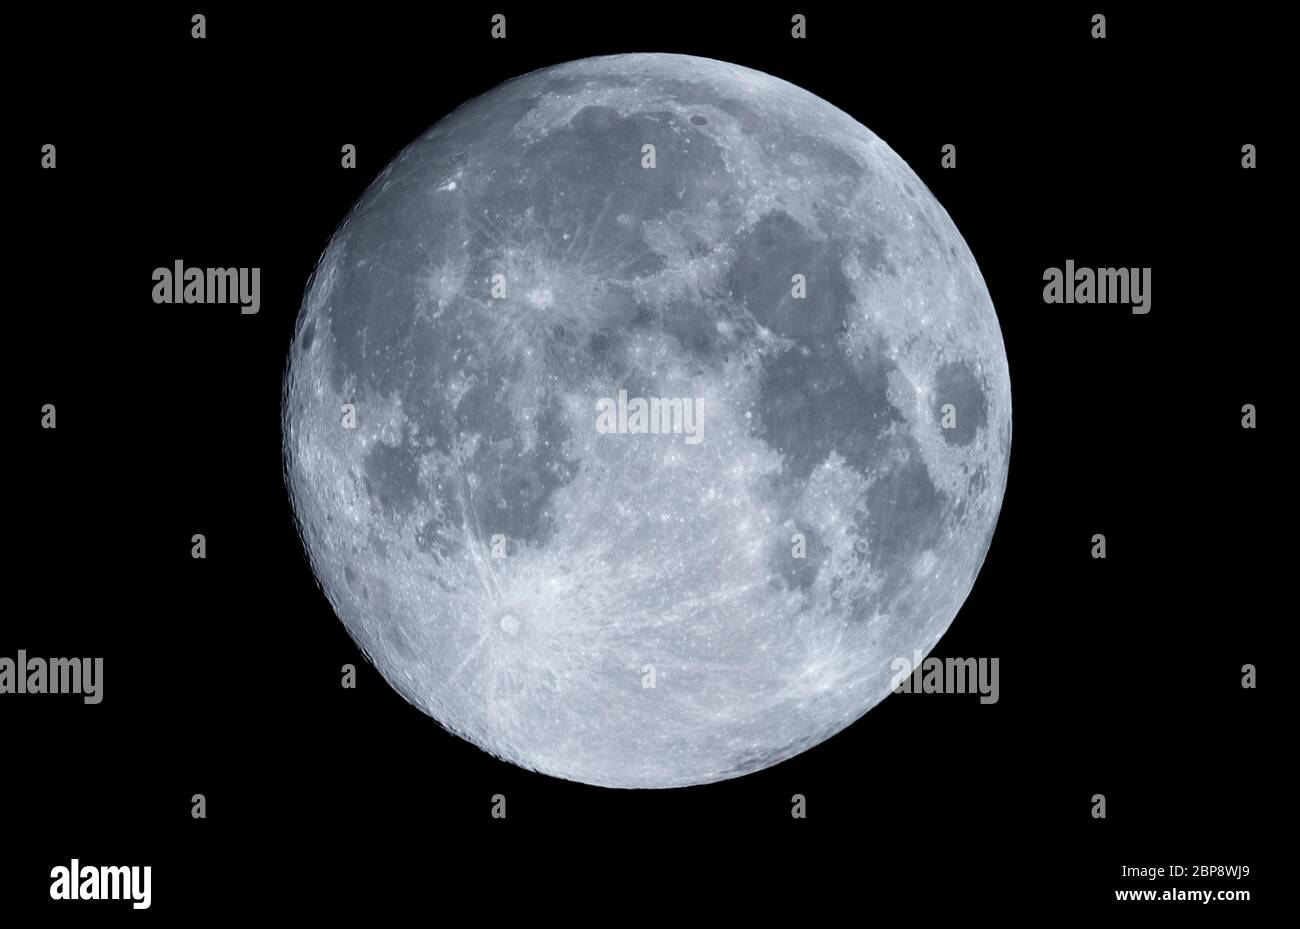 The almost full Moon on 4th November 2006 showing darker ‘seas’ against highland and crater pocked regions. Stock Photo